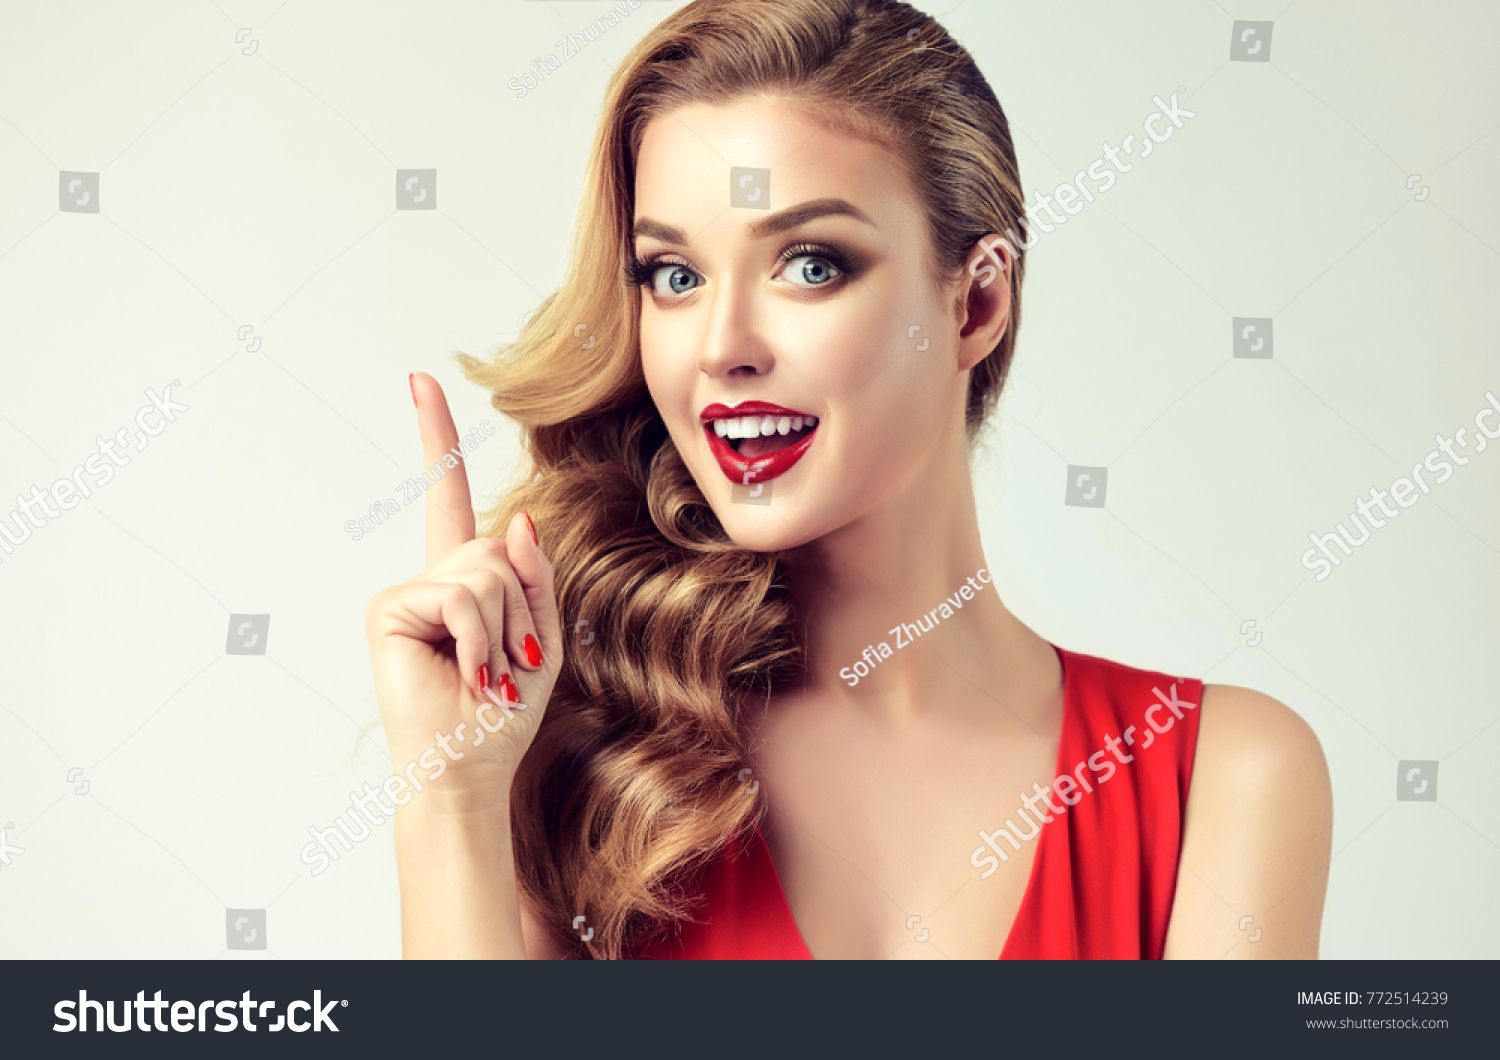 Surprised woman showing product .Beautiful girl with curly hair, pointing a finger at the top . Presenting your product. Expressive facial expressions . Teaching and edification . #772514239